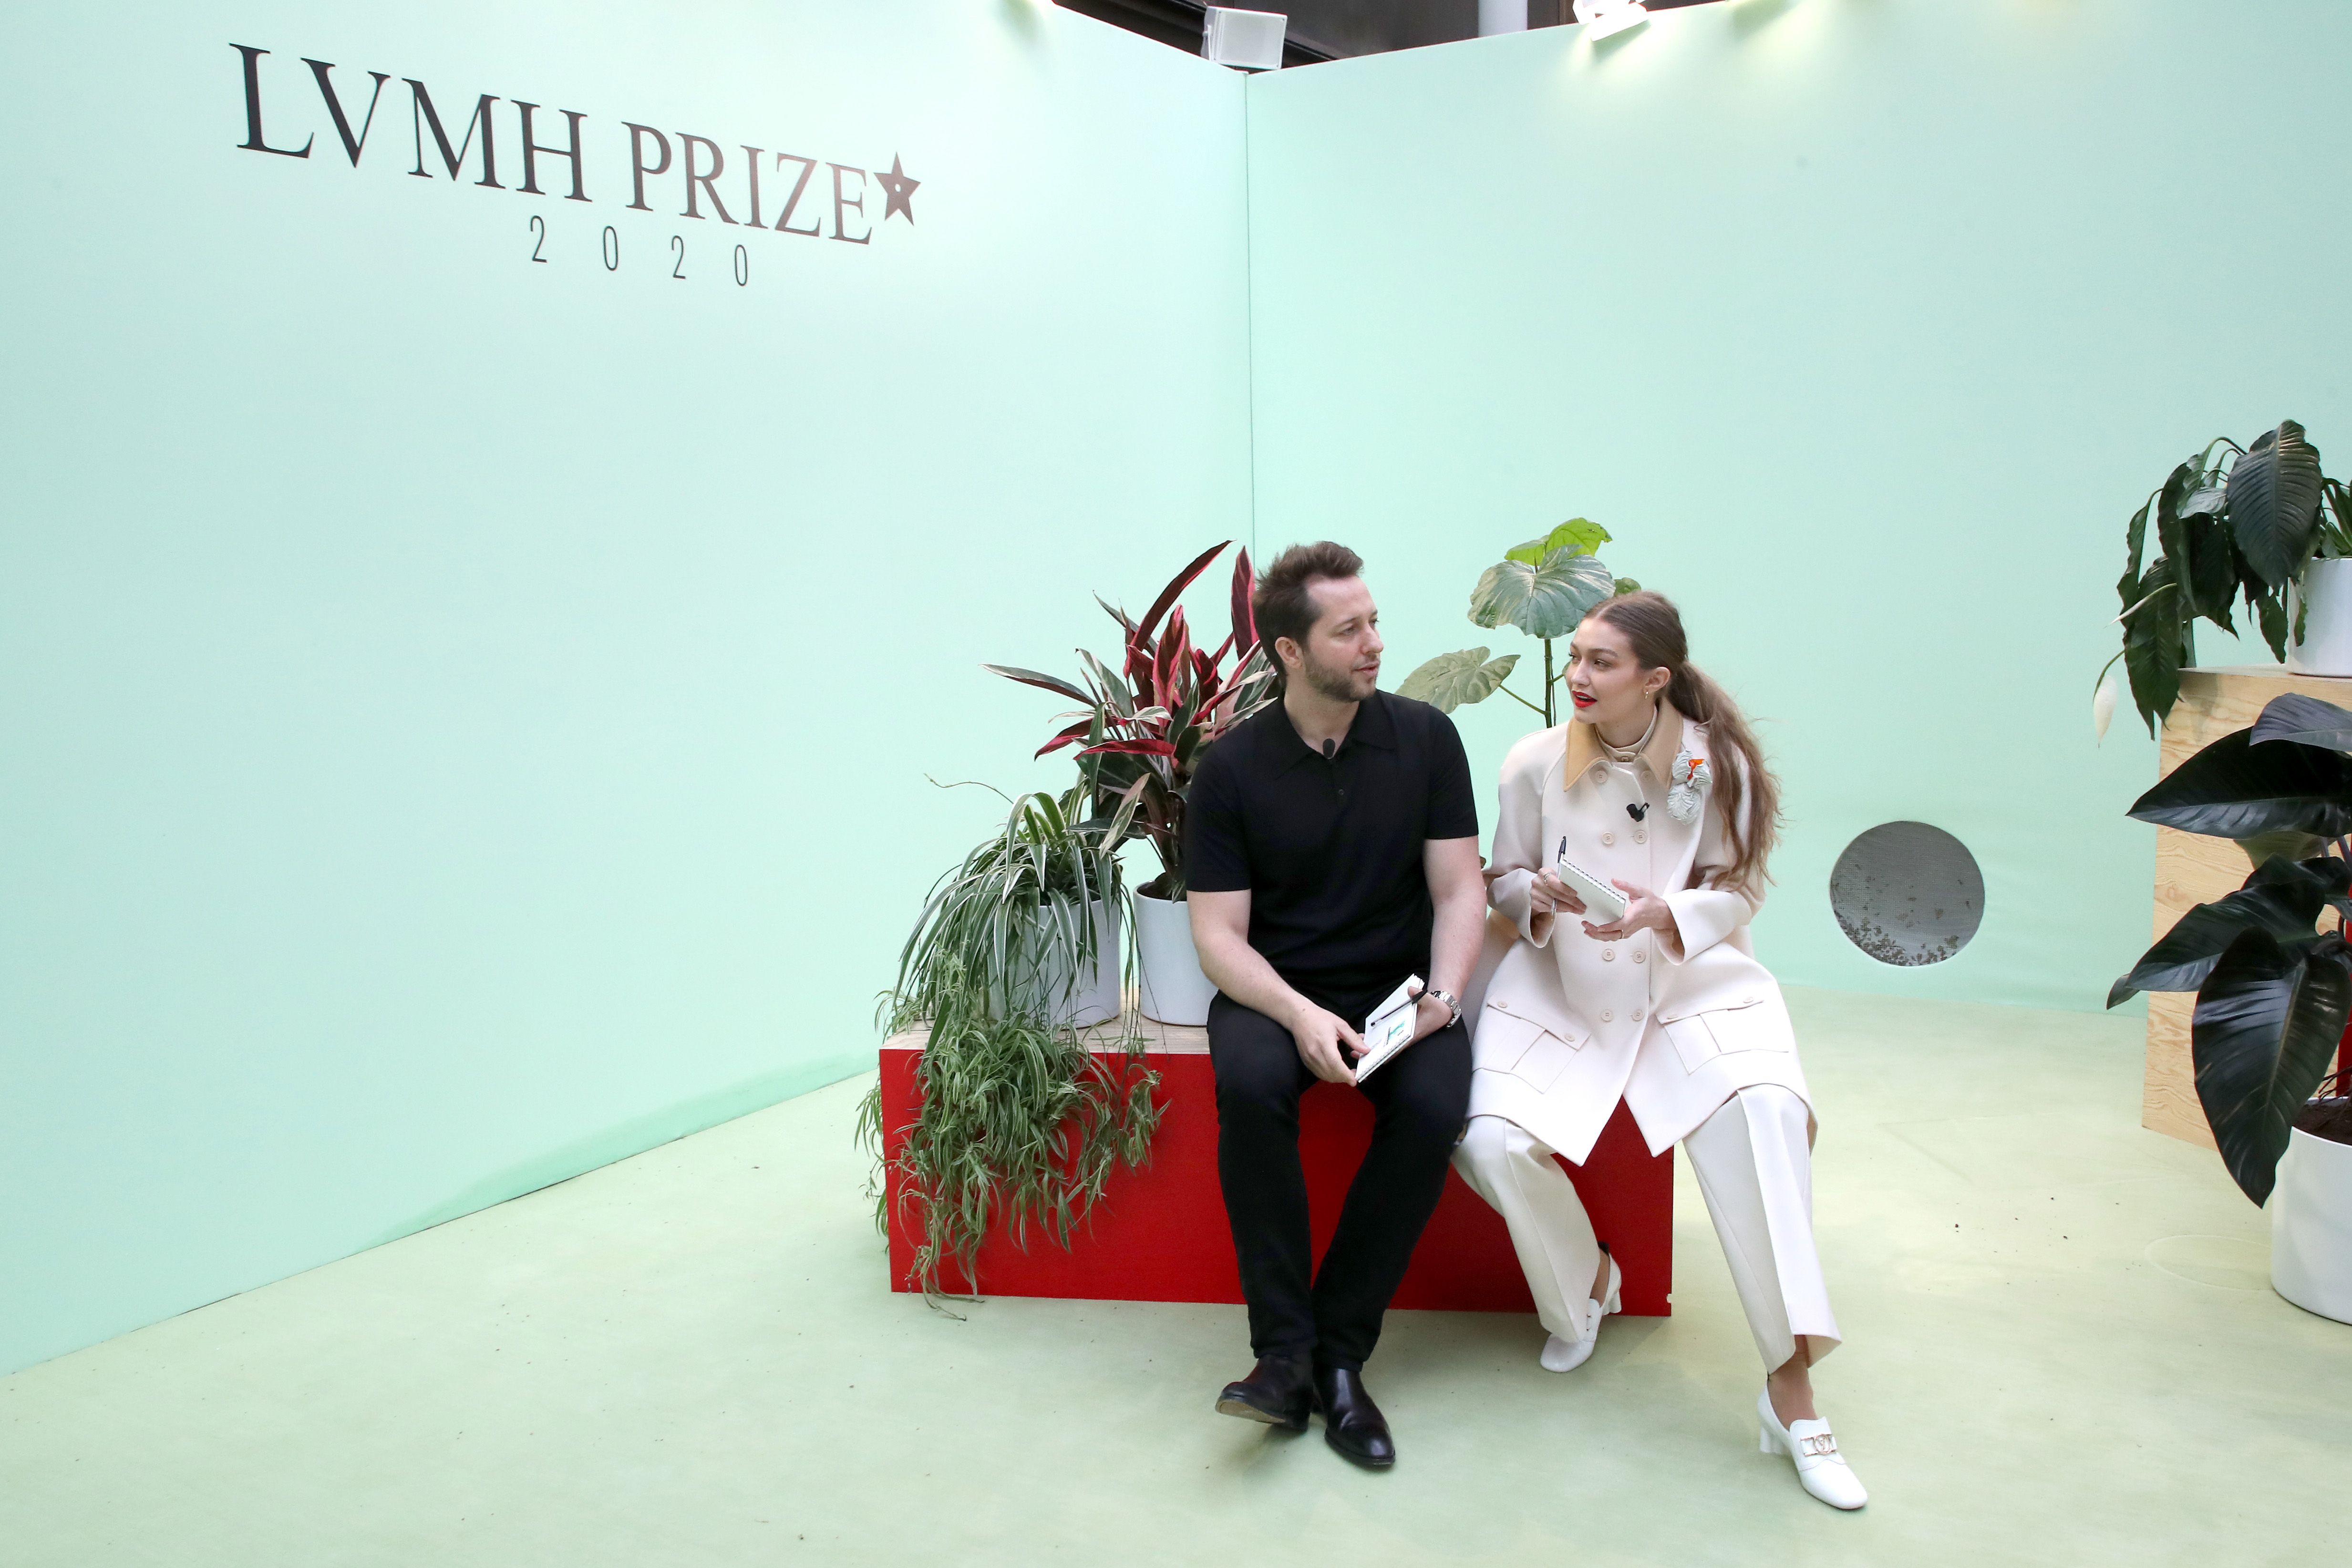 This year's LVMH Prize will be split between the finalists